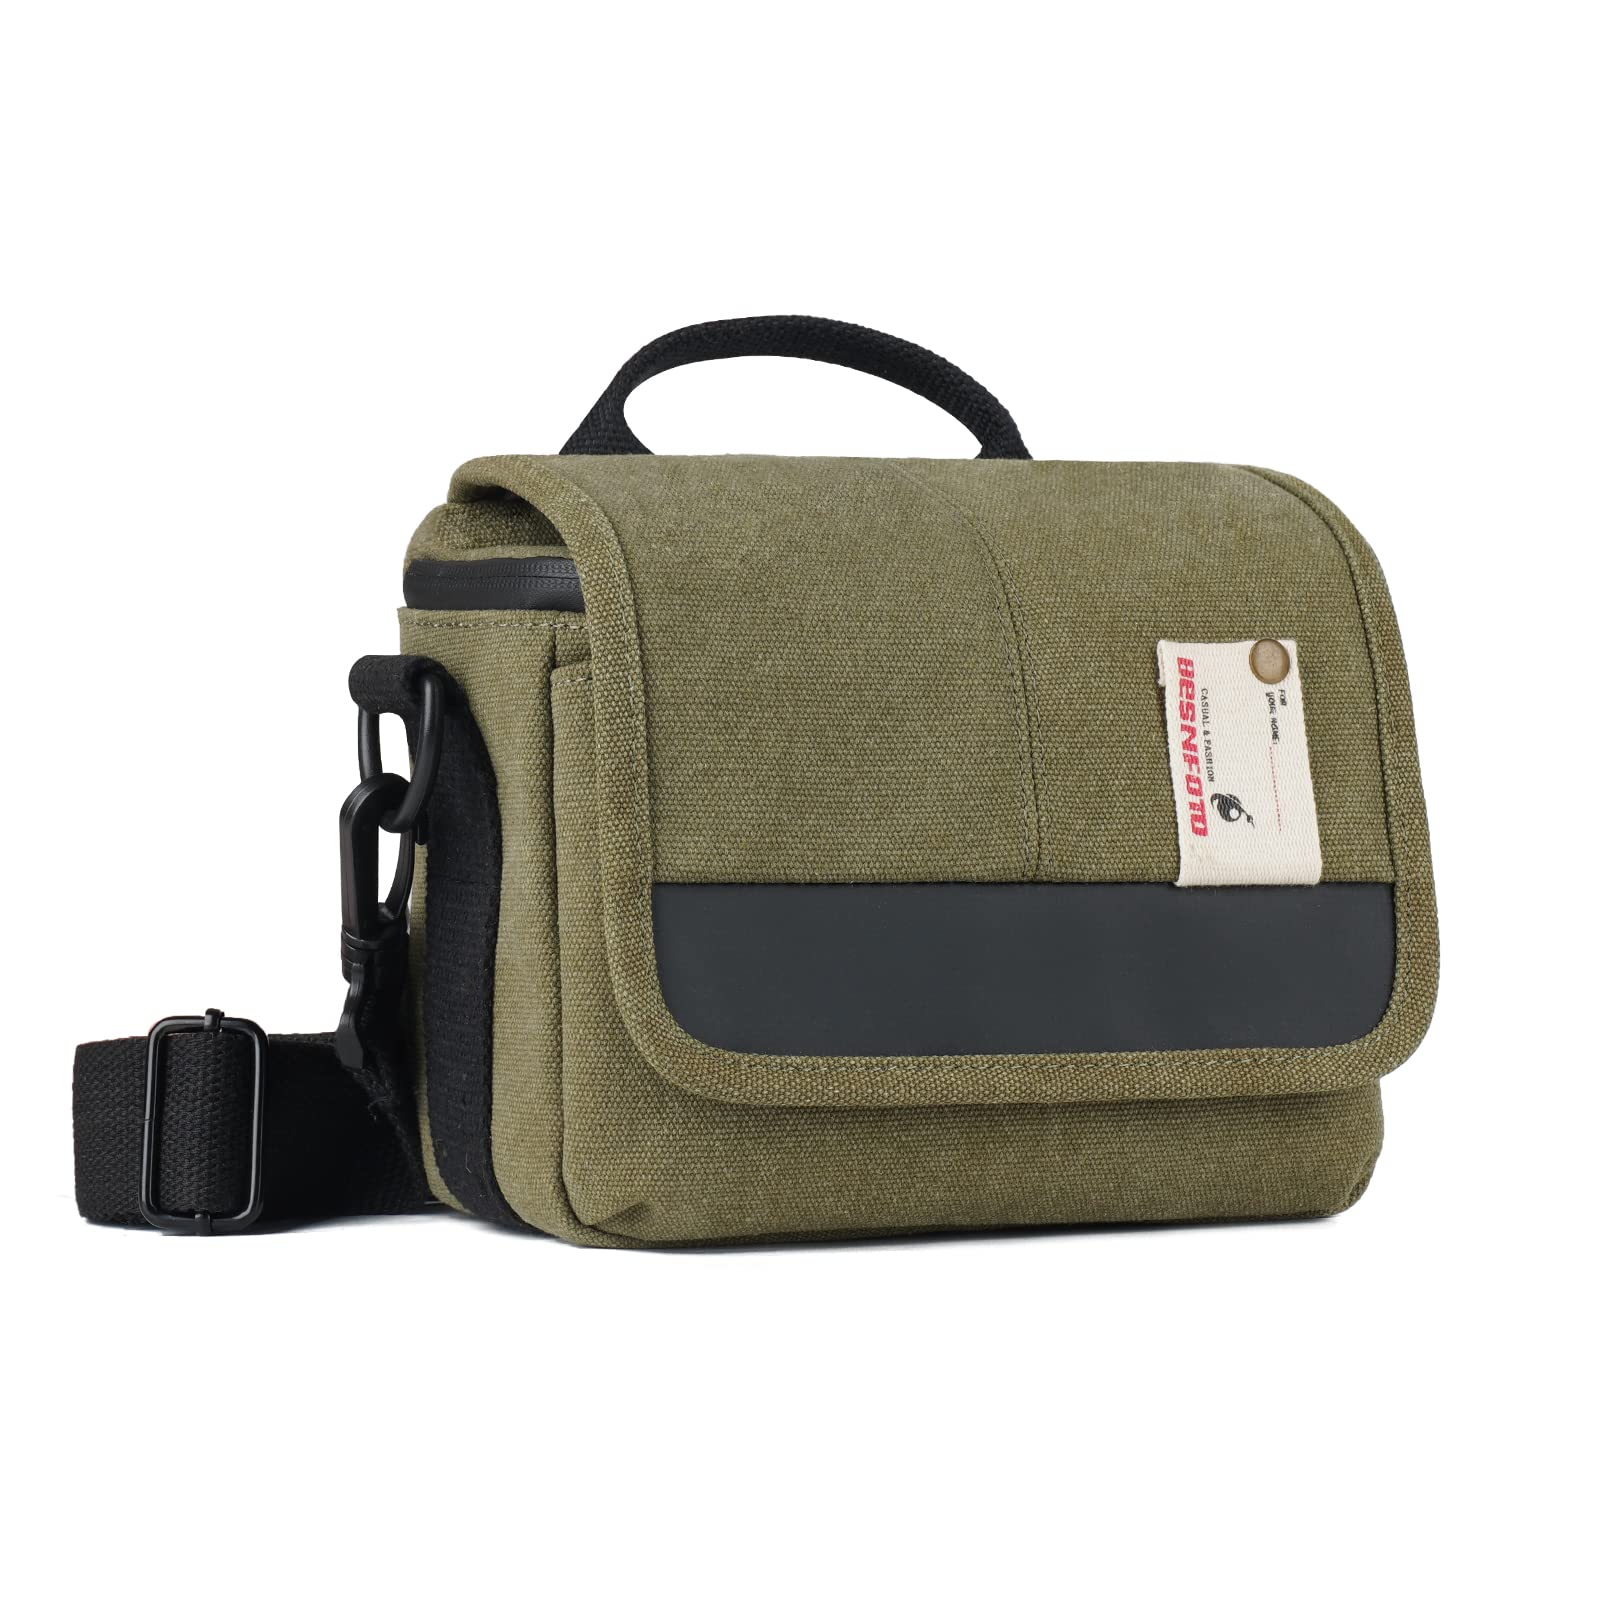 Bagbase BG21 Bagbase Messenger Bag - Bags & Carriers from MI Supplies  Limited UK